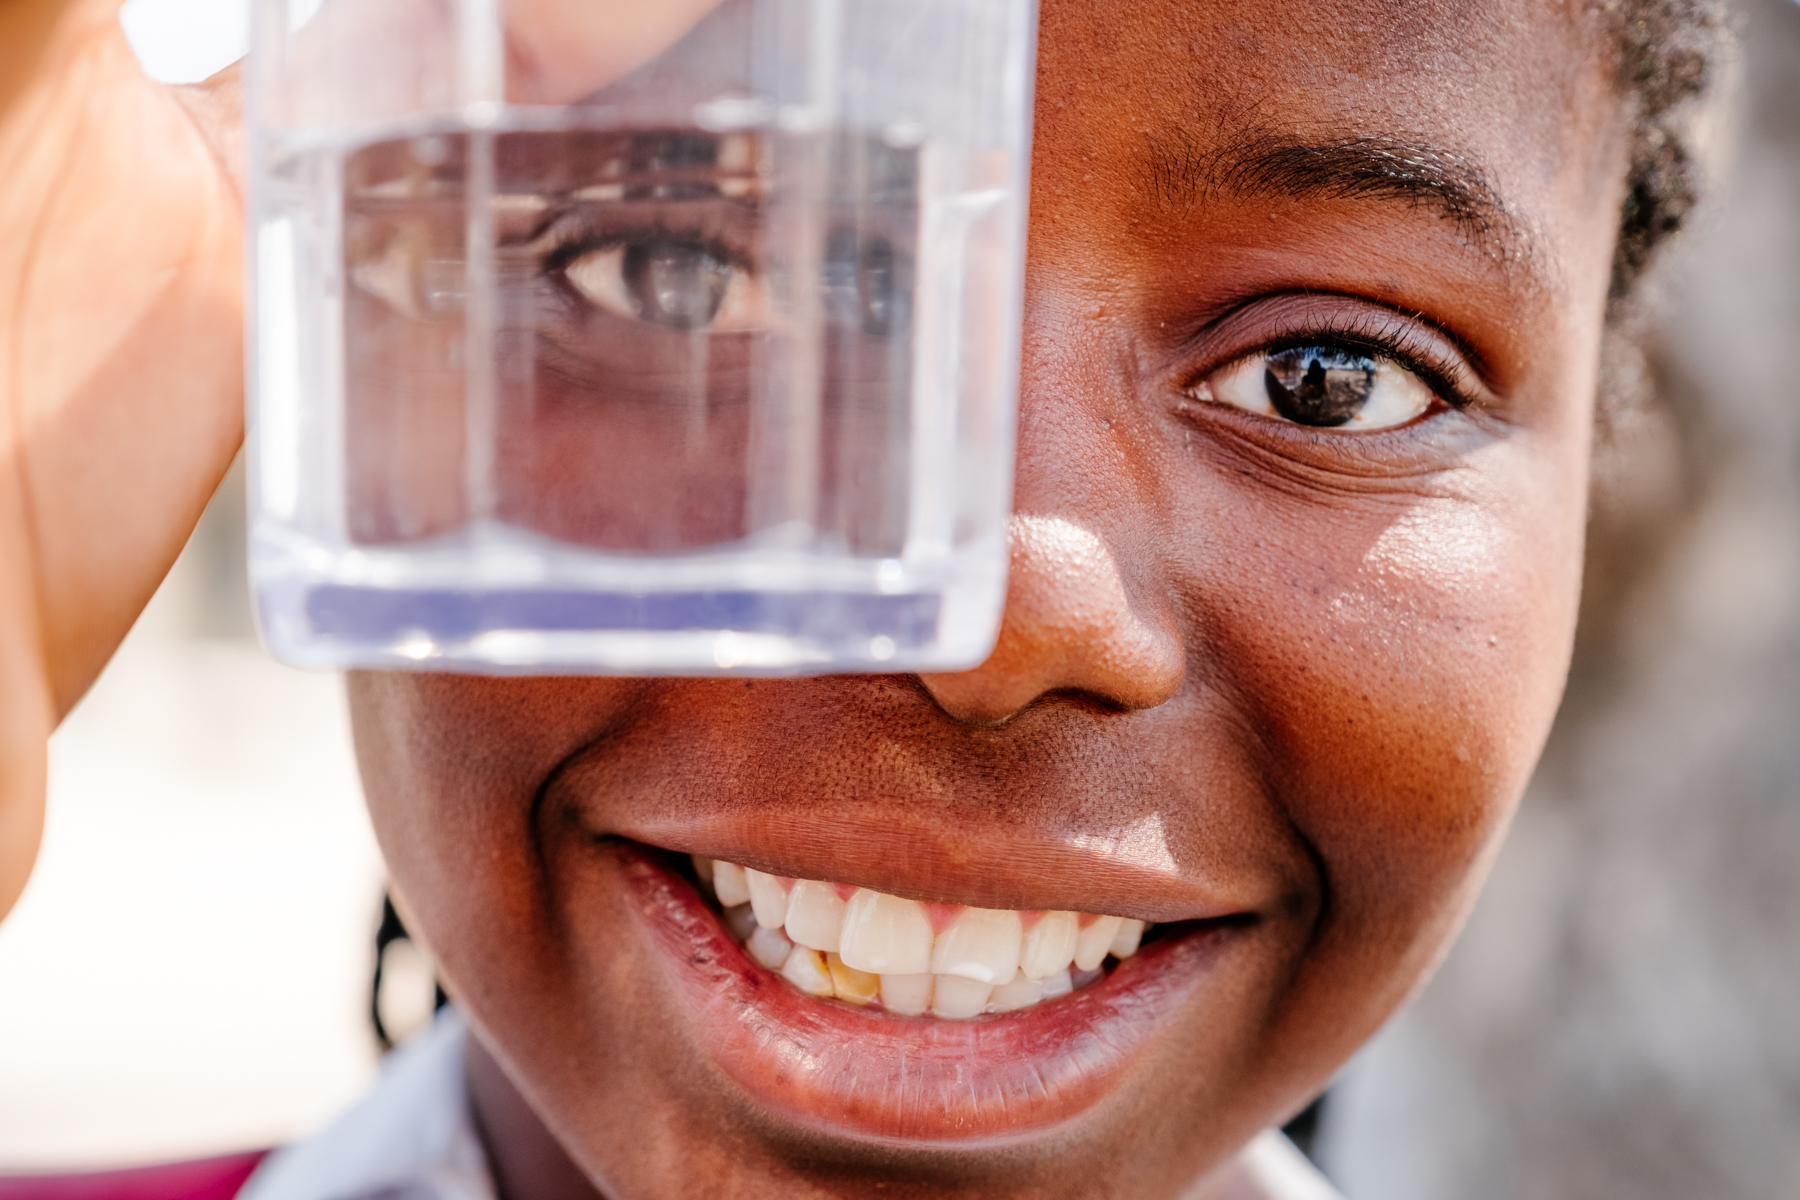 Girl in Mozambique looking through a glass for drinking water and smiling.